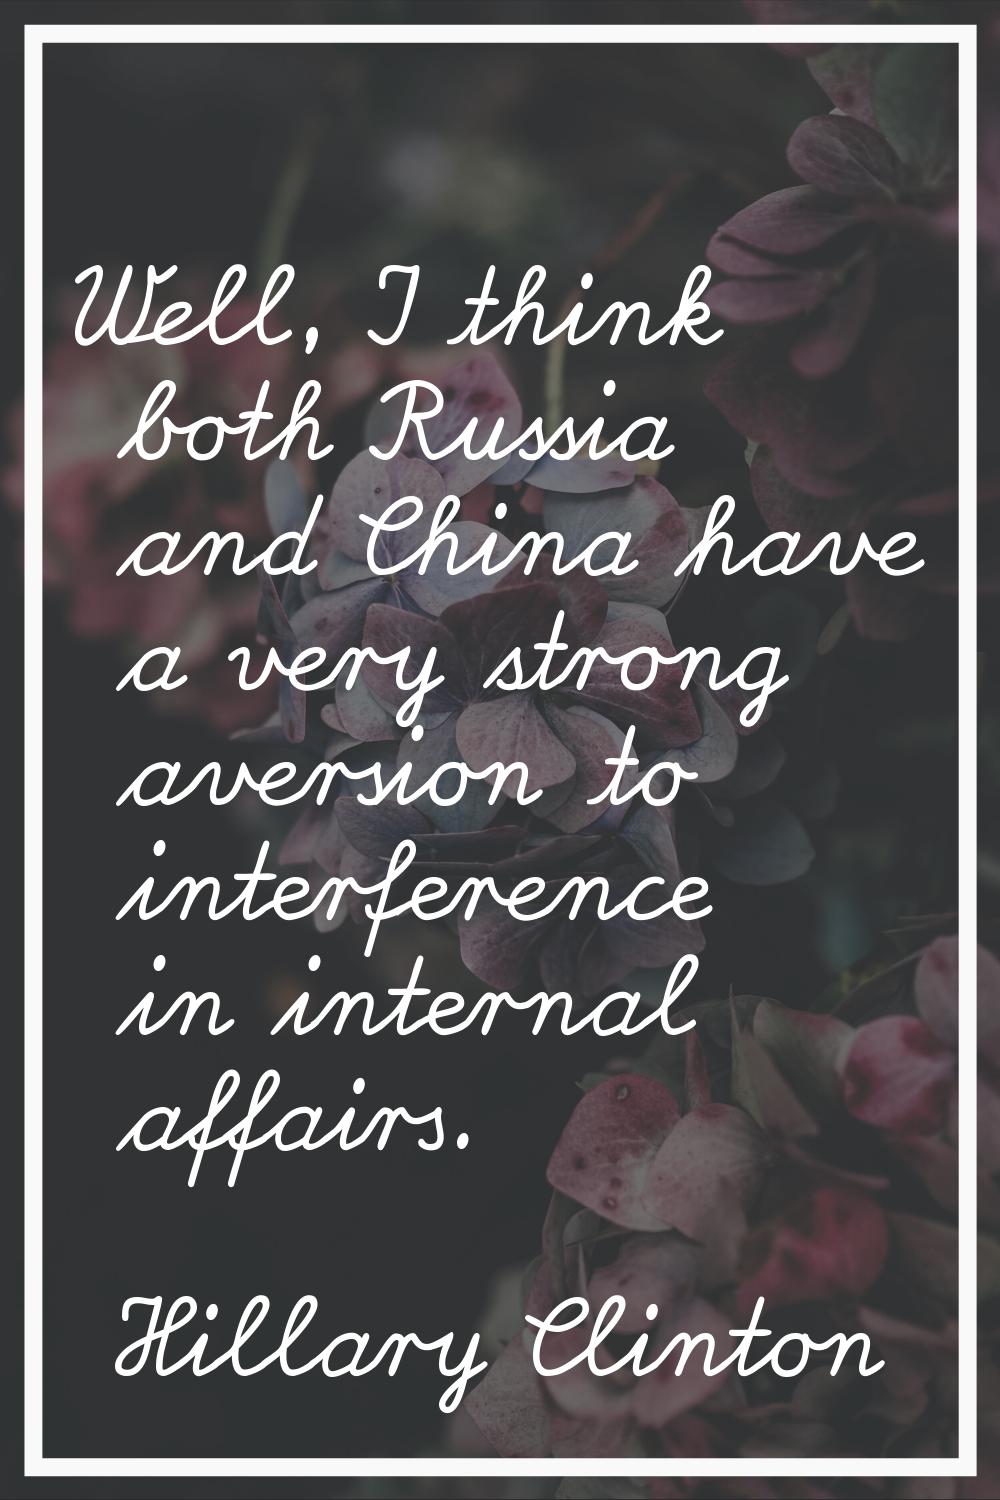 Well, I think both Russia and China have a very strong aversion to interference in internal affairs